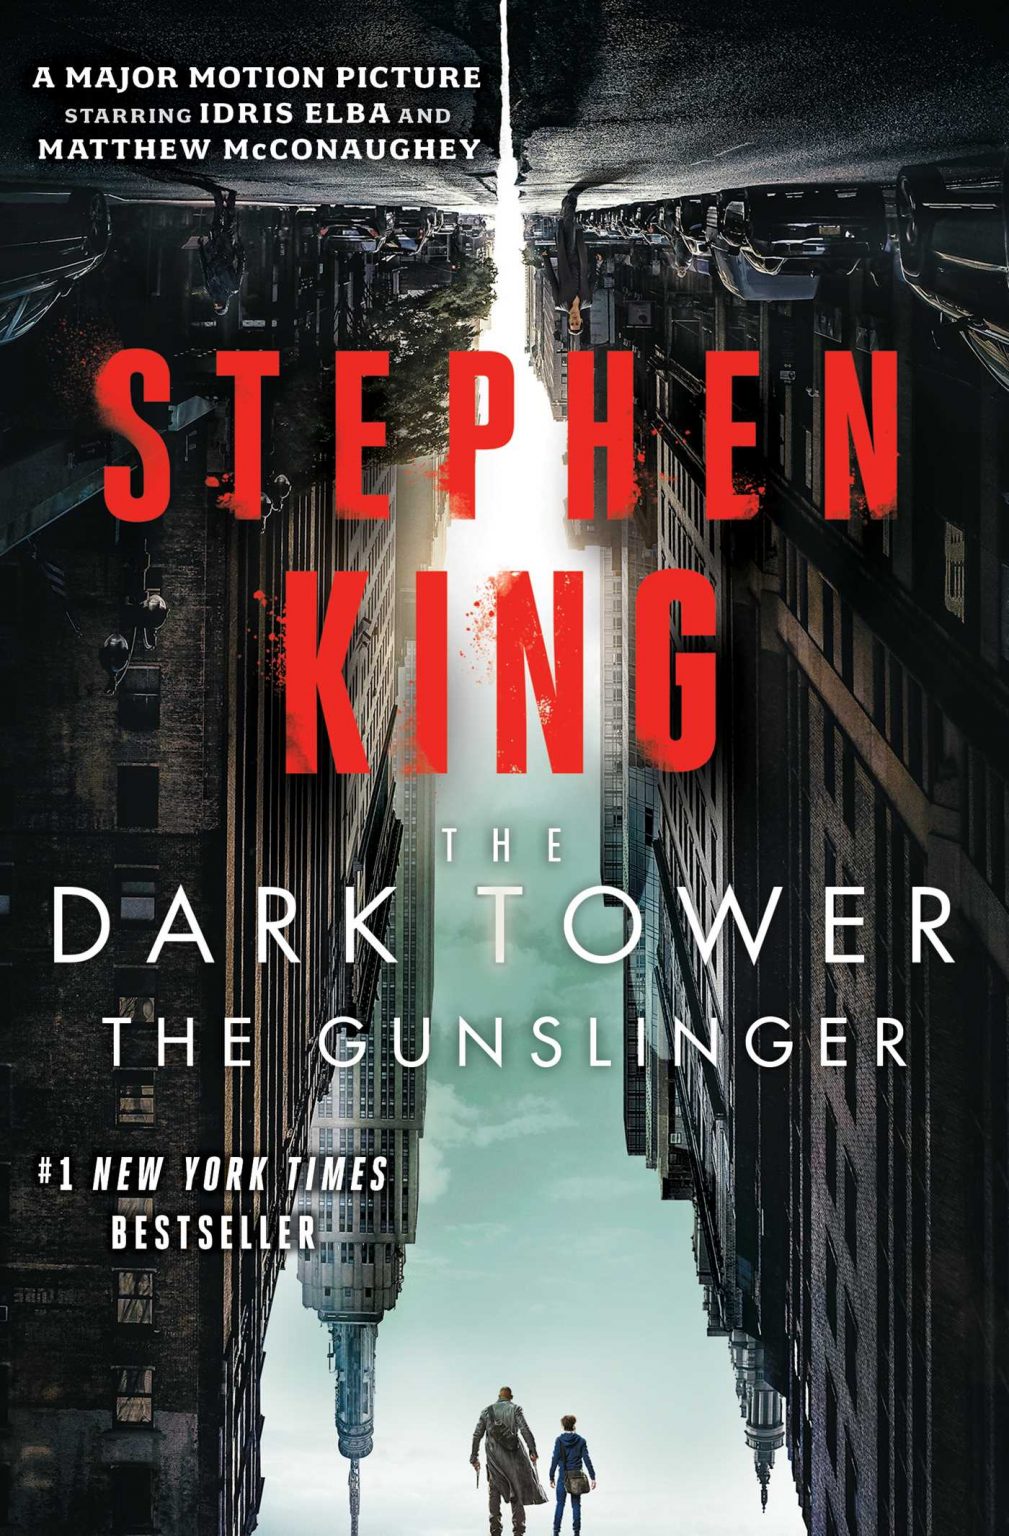 The Dark Tower #1-3 by Stephen King